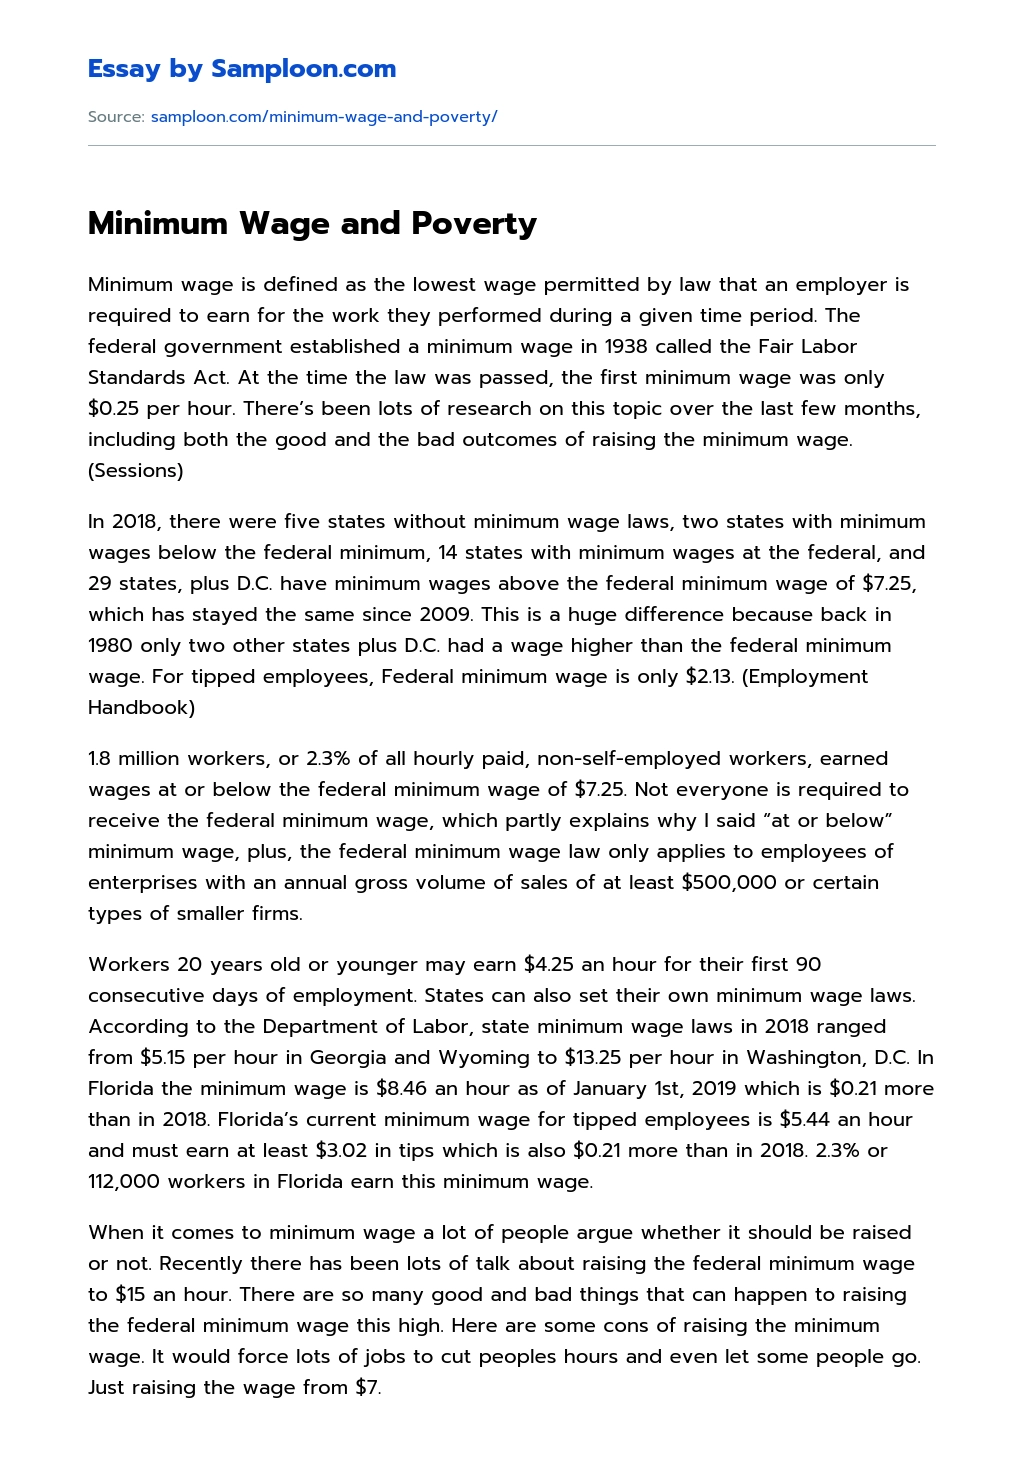 Minimum Wage and Poverty essay